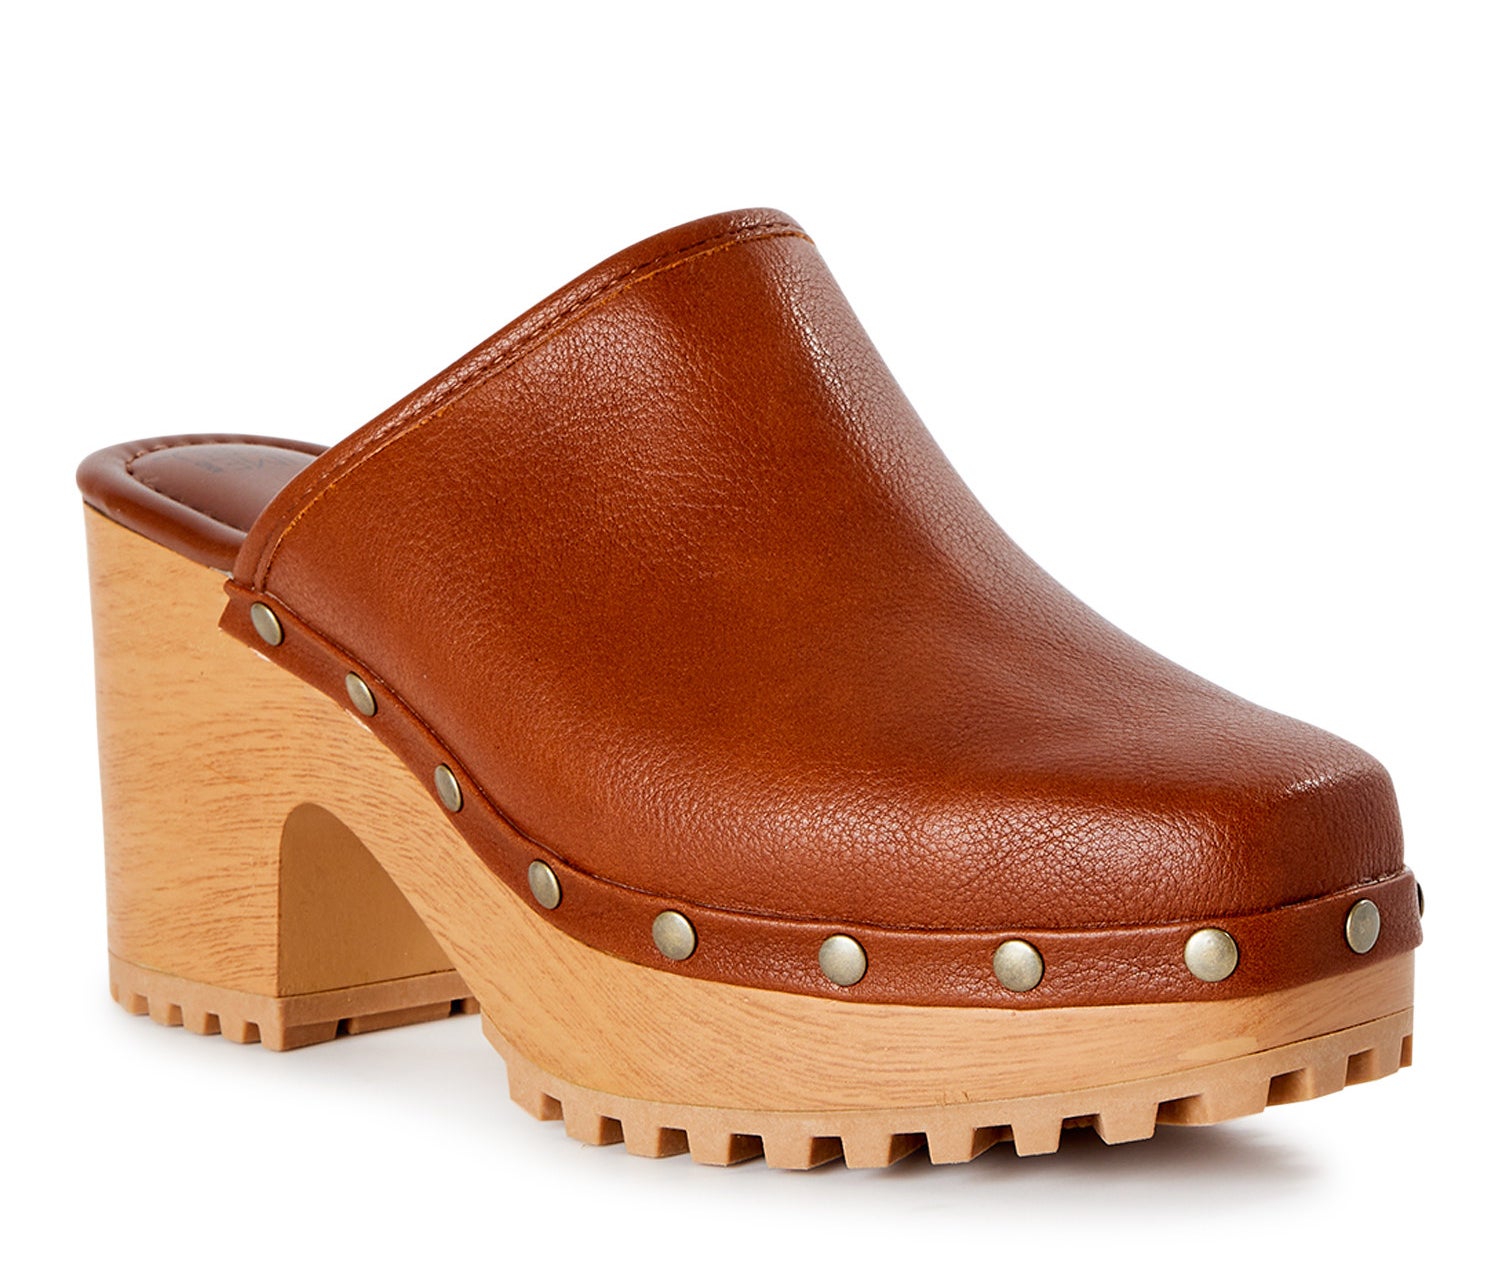 A brown leather shoe with wood